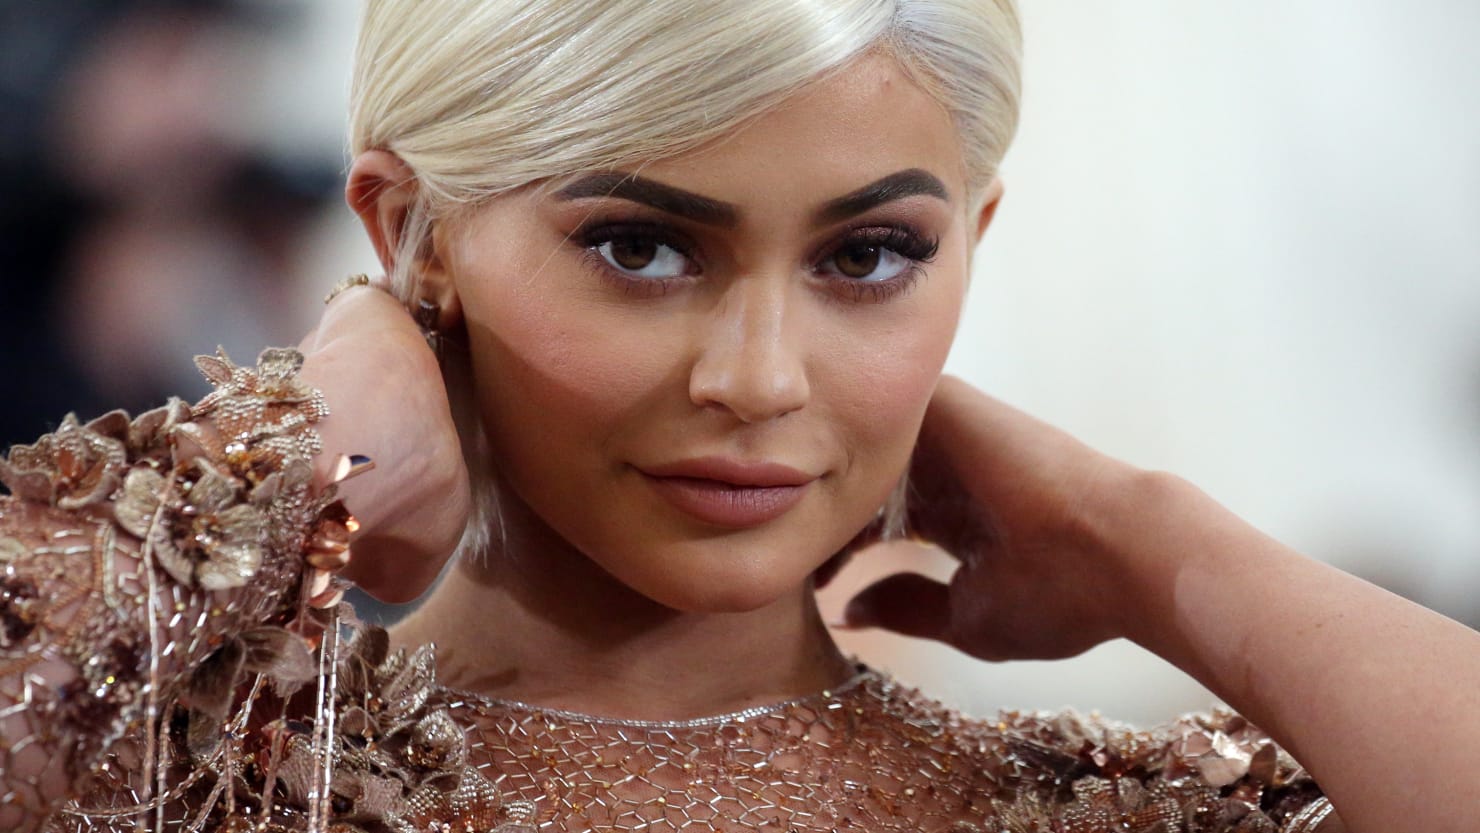 Kylie Jenner faces setback after asking fans to help pay for Stylist’s surgeon